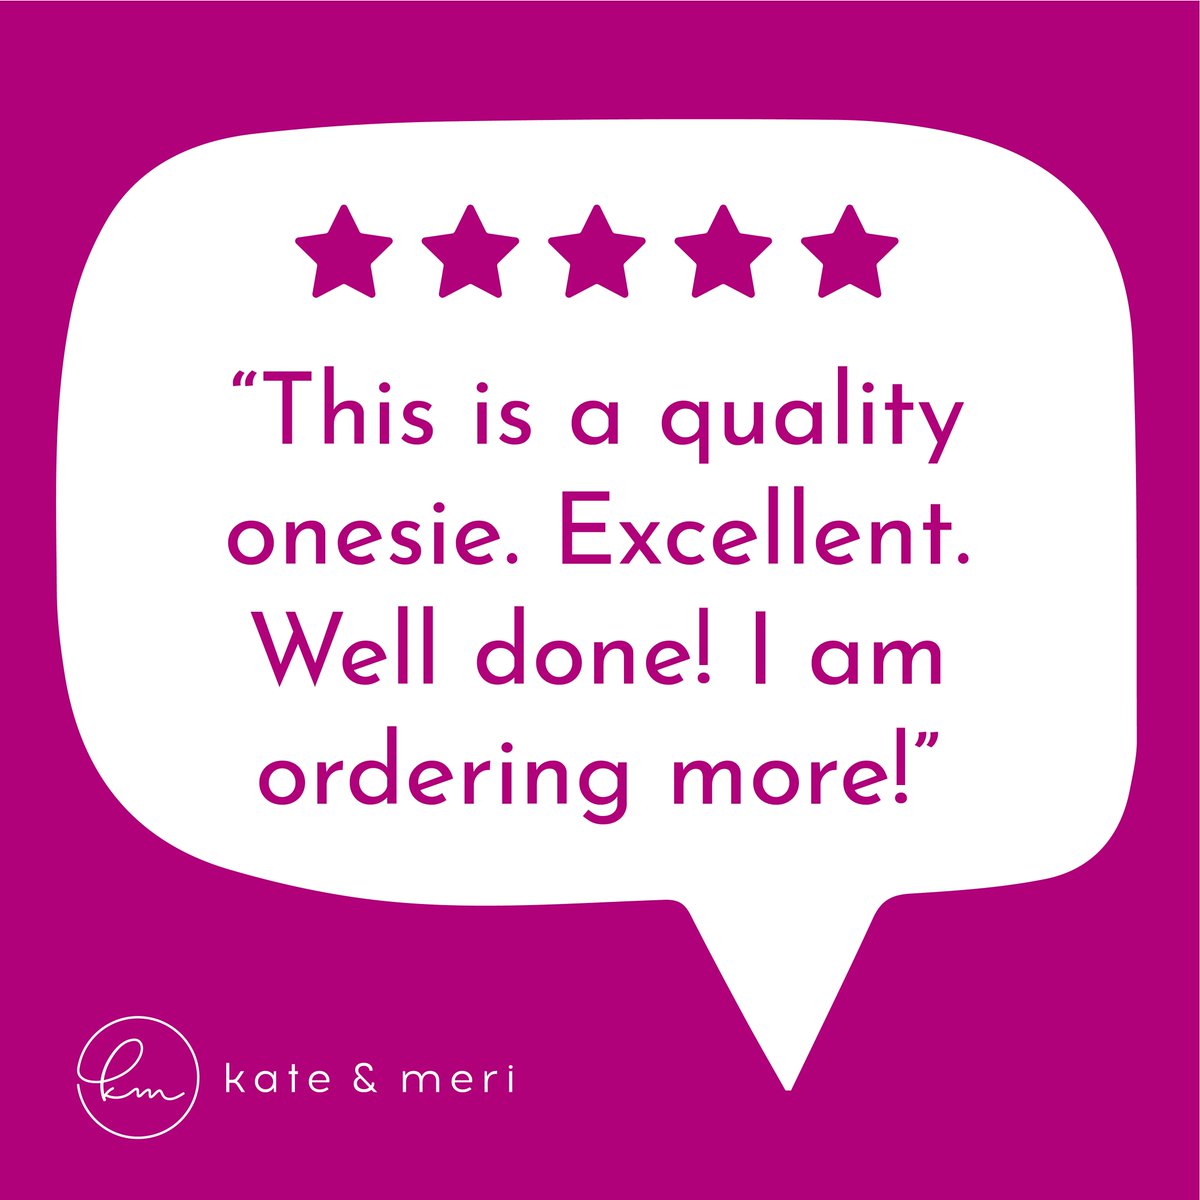 'This is a quality onesie. Excellent. Well done! I am ordering more!' - Susan

#customonesie #babyonesie #babygift #custombabyclothes